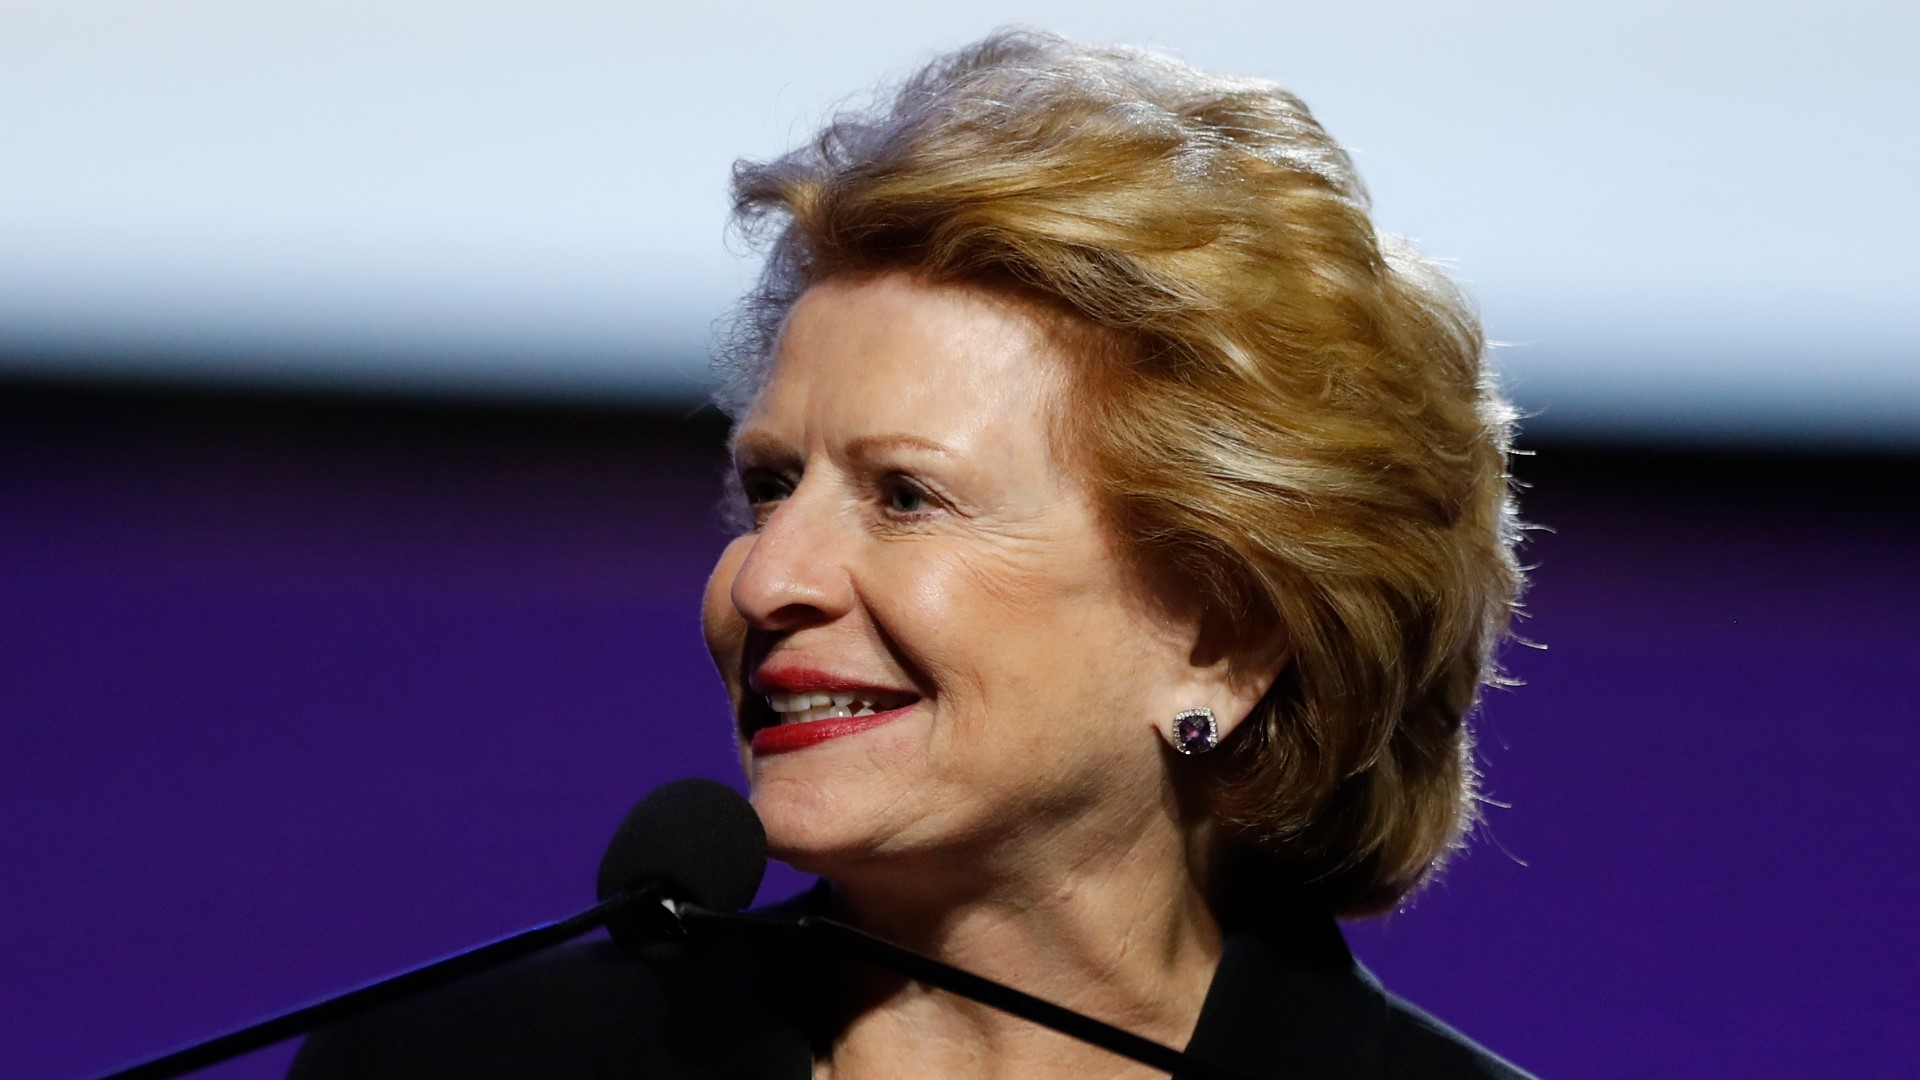 Friday morning, U.S. Senator Debbie Stabenow announced her intent to not seek re-election in 2024.